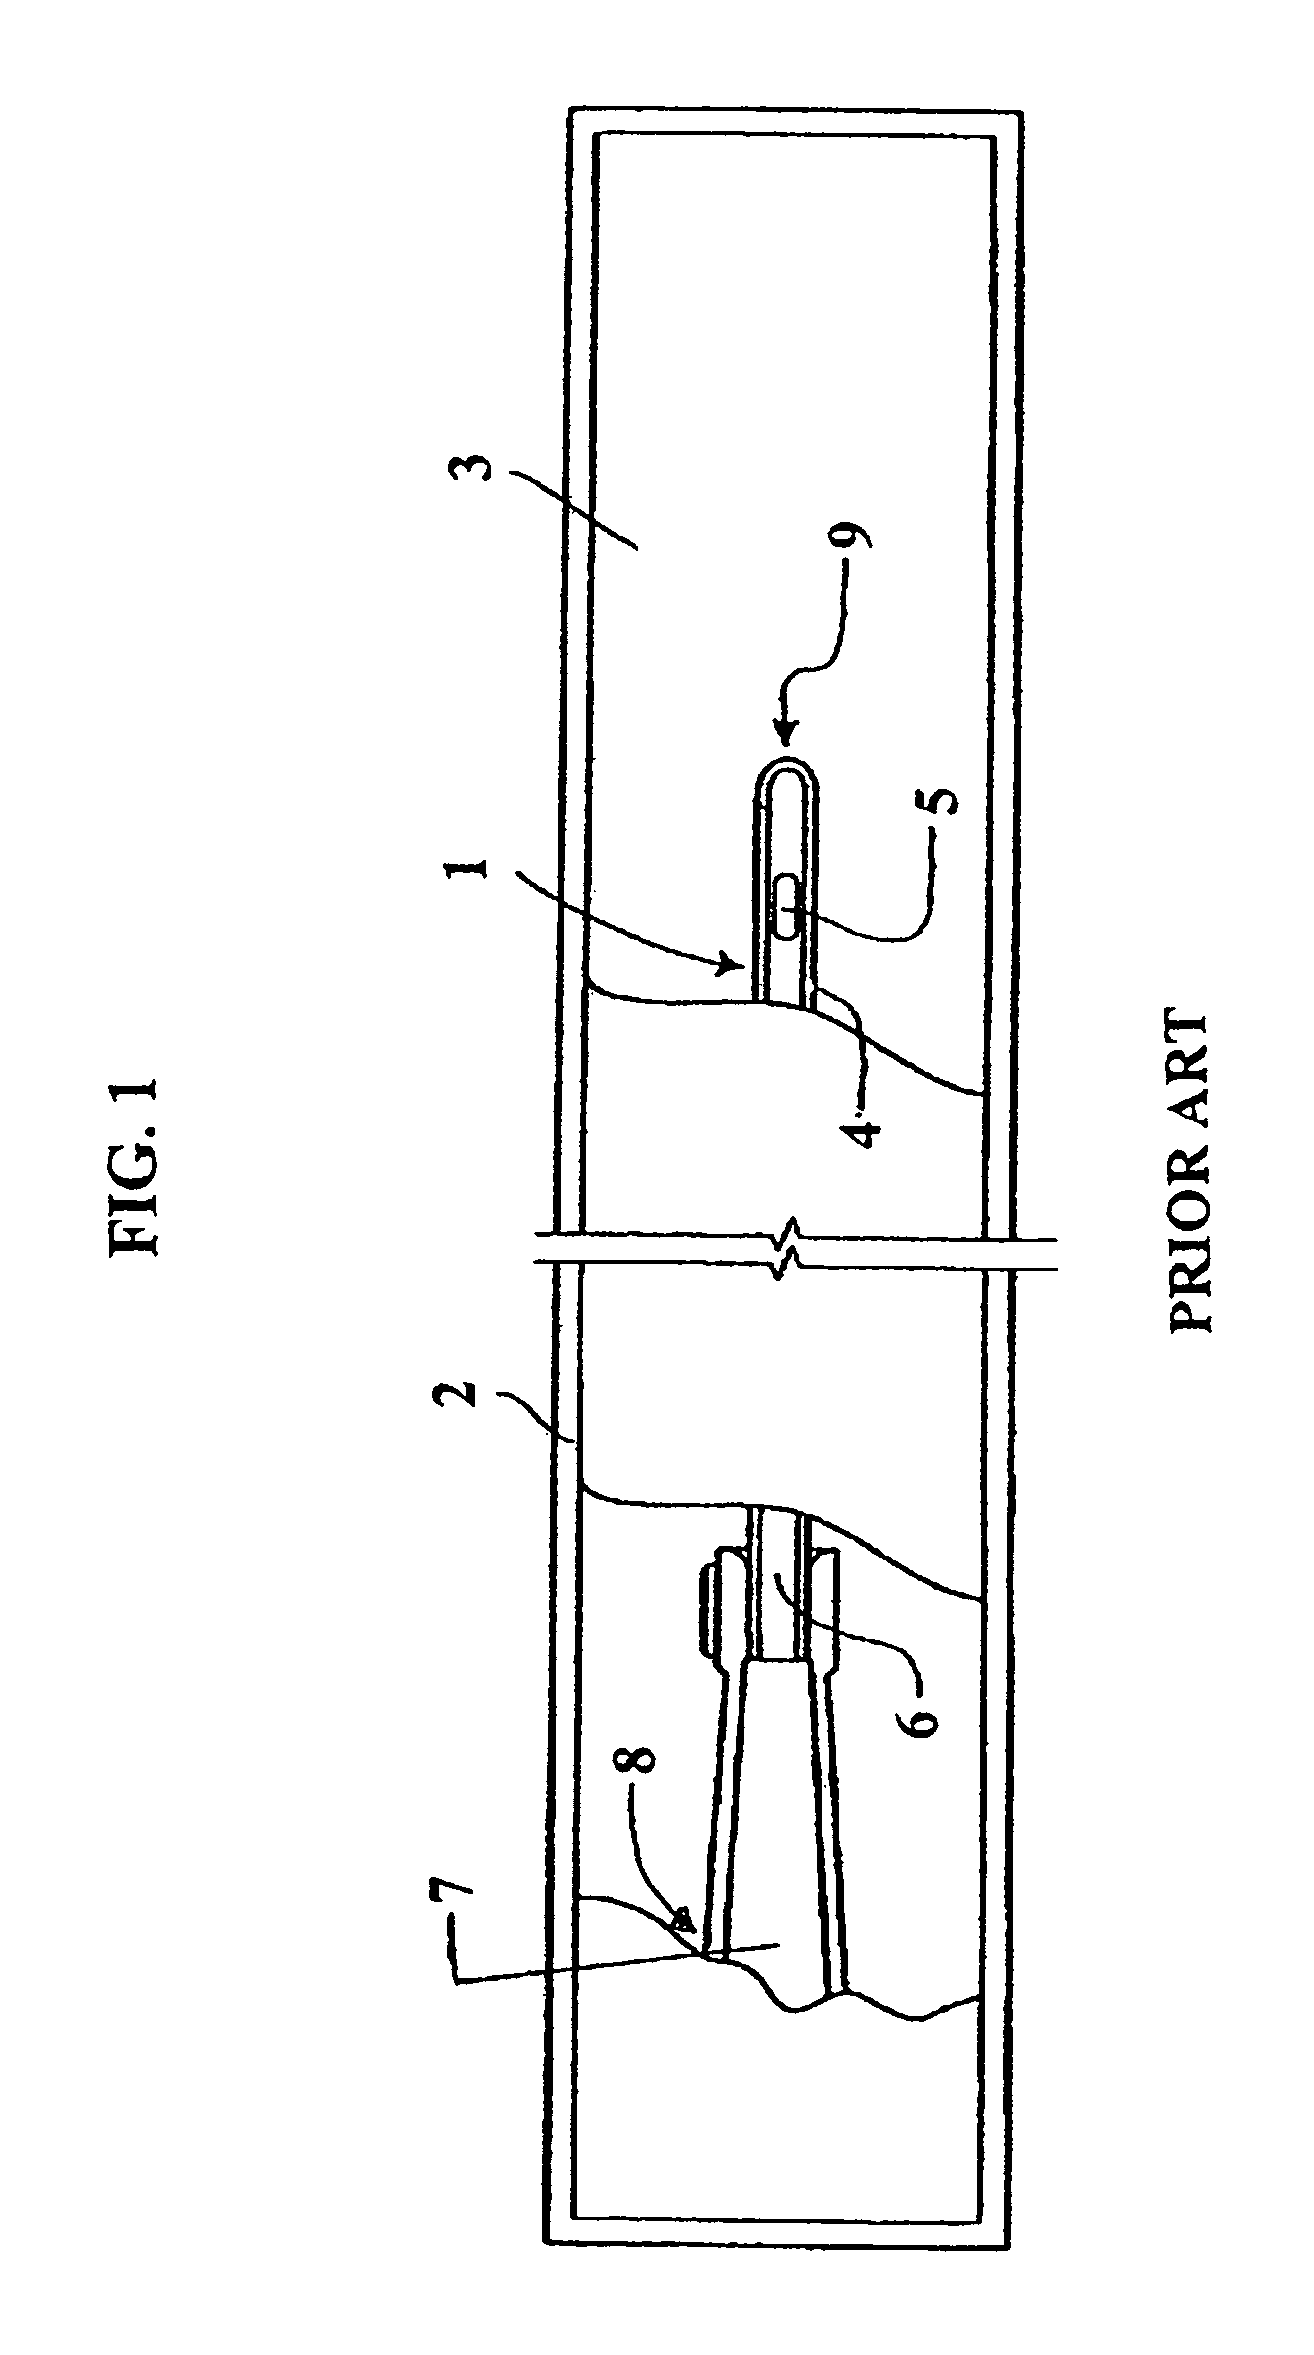 Catheter assembly/package utilizing a hydrating/hydrogel sleeve and a foil outer layer and method of making and using the same